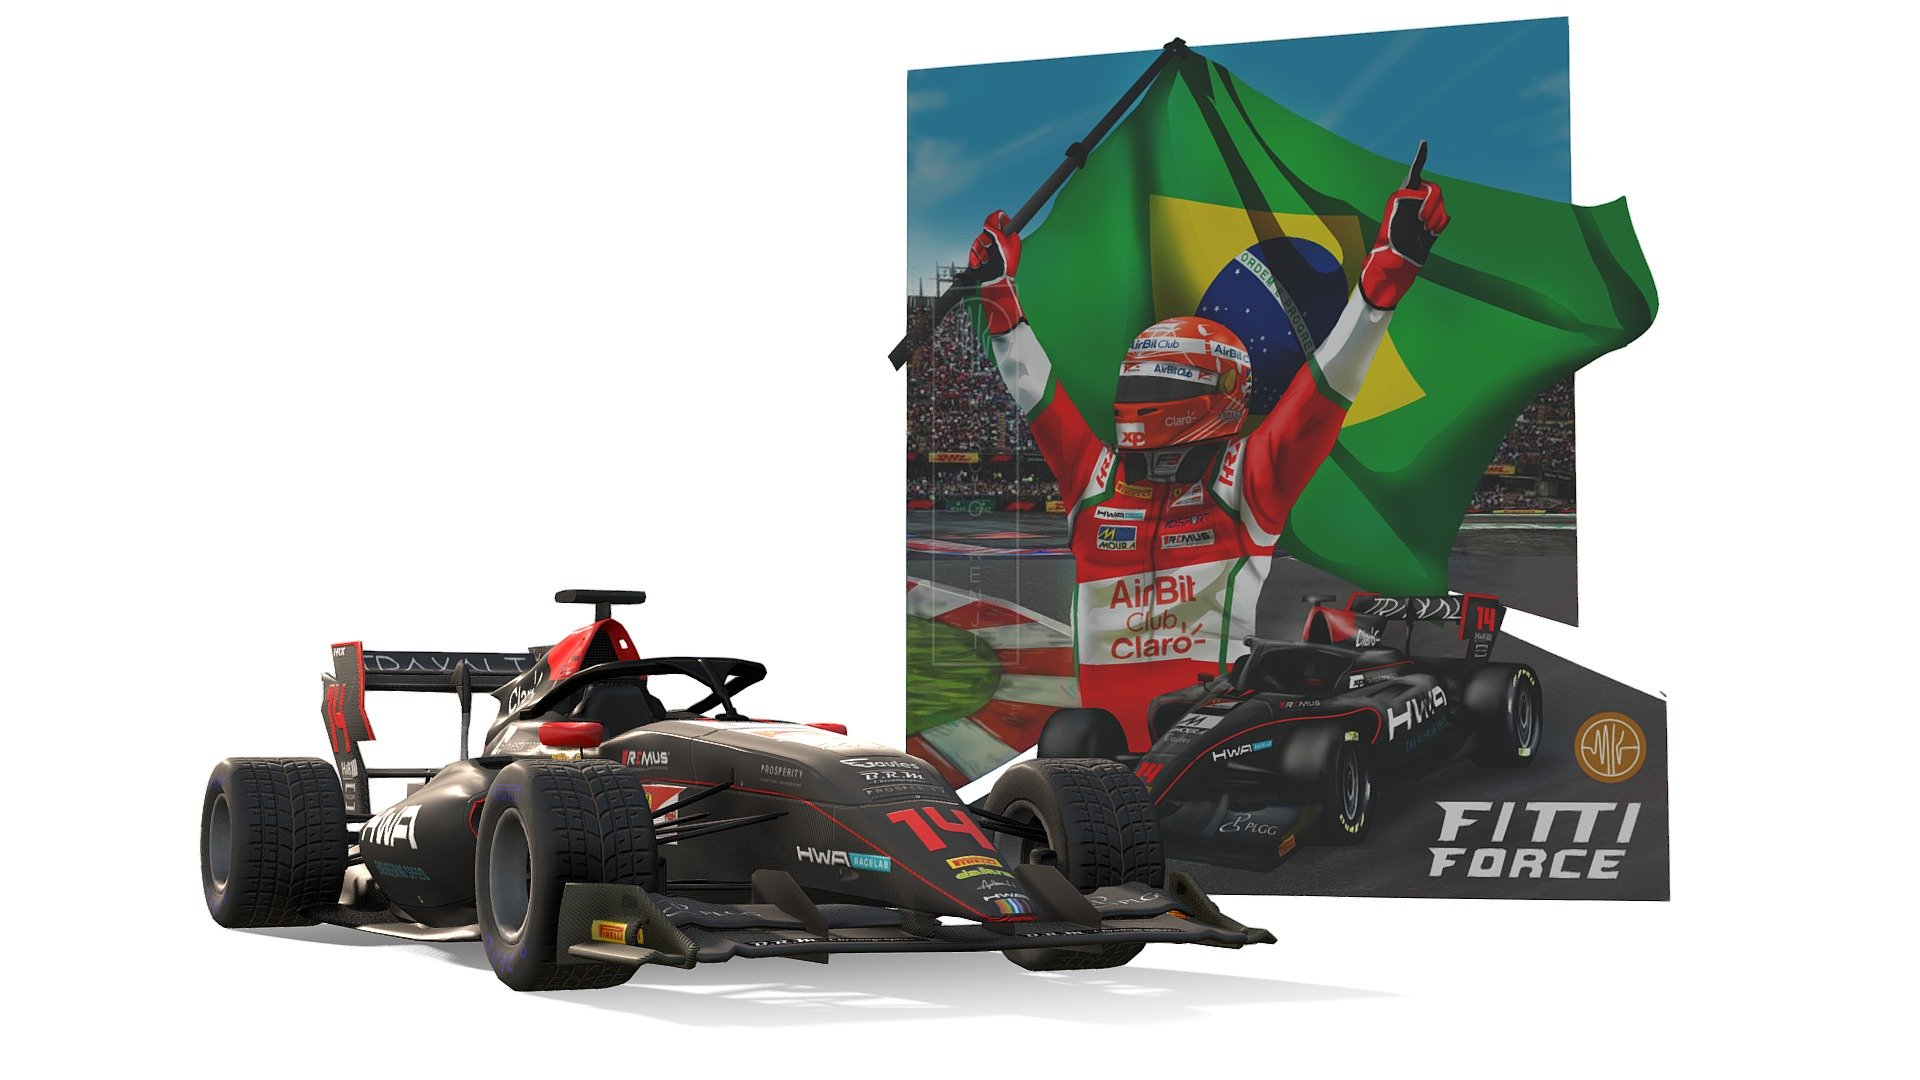 This 3D model is dedicated to Enzo Fittipaldi, Pietro Fittipaldi and #Fittiforce.
I've been following Enzo's career for a short time, but it didn't take long to become another fan. 

Good luck Enzo, on this journey, there are still many achievements ahead!! 

Obrigado por carregar nossa bandeira! - FIA F3 Car 2020 - Enzo Fittpaldi - HWA RACELAB - 3D model by Kenji Marcio (@kenjimarcio) 3d model